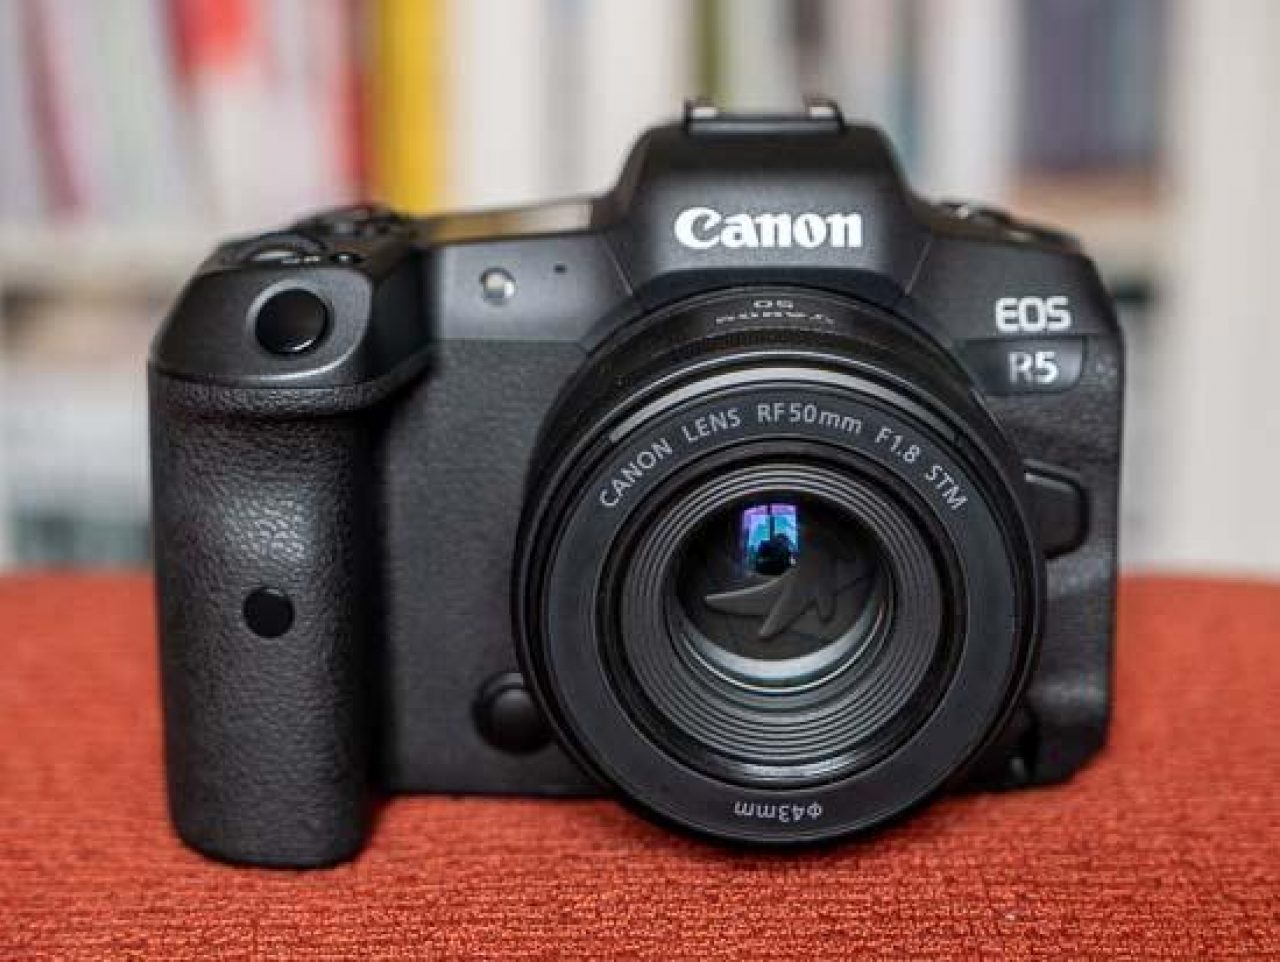 Canon RF 50mm F/1.8 STM review: It's everything a nifty fifty should be